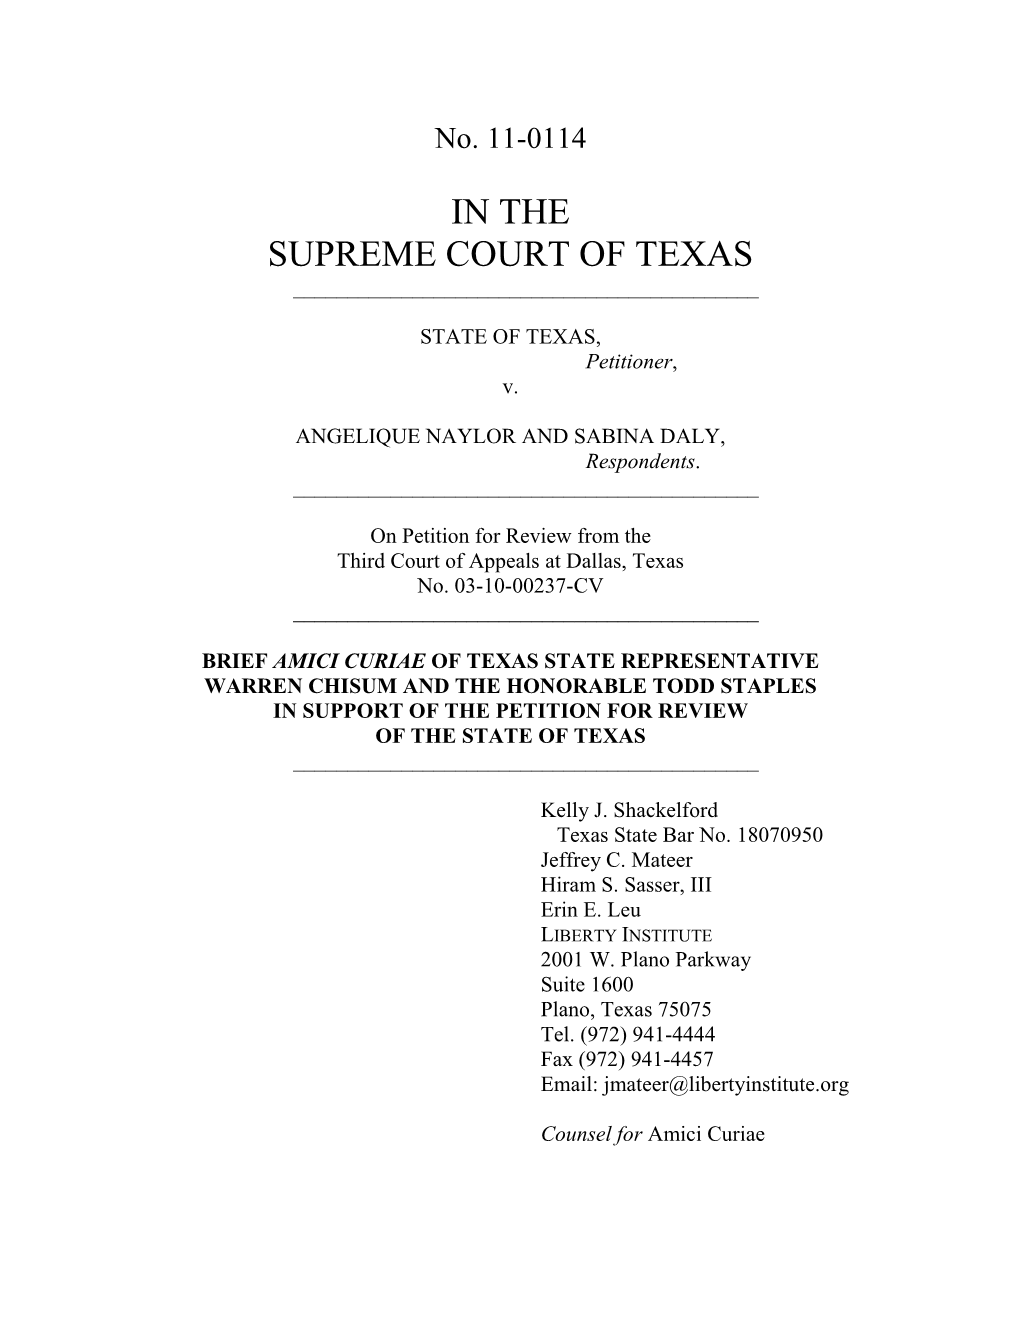 In the Supreme Court of Texas ______